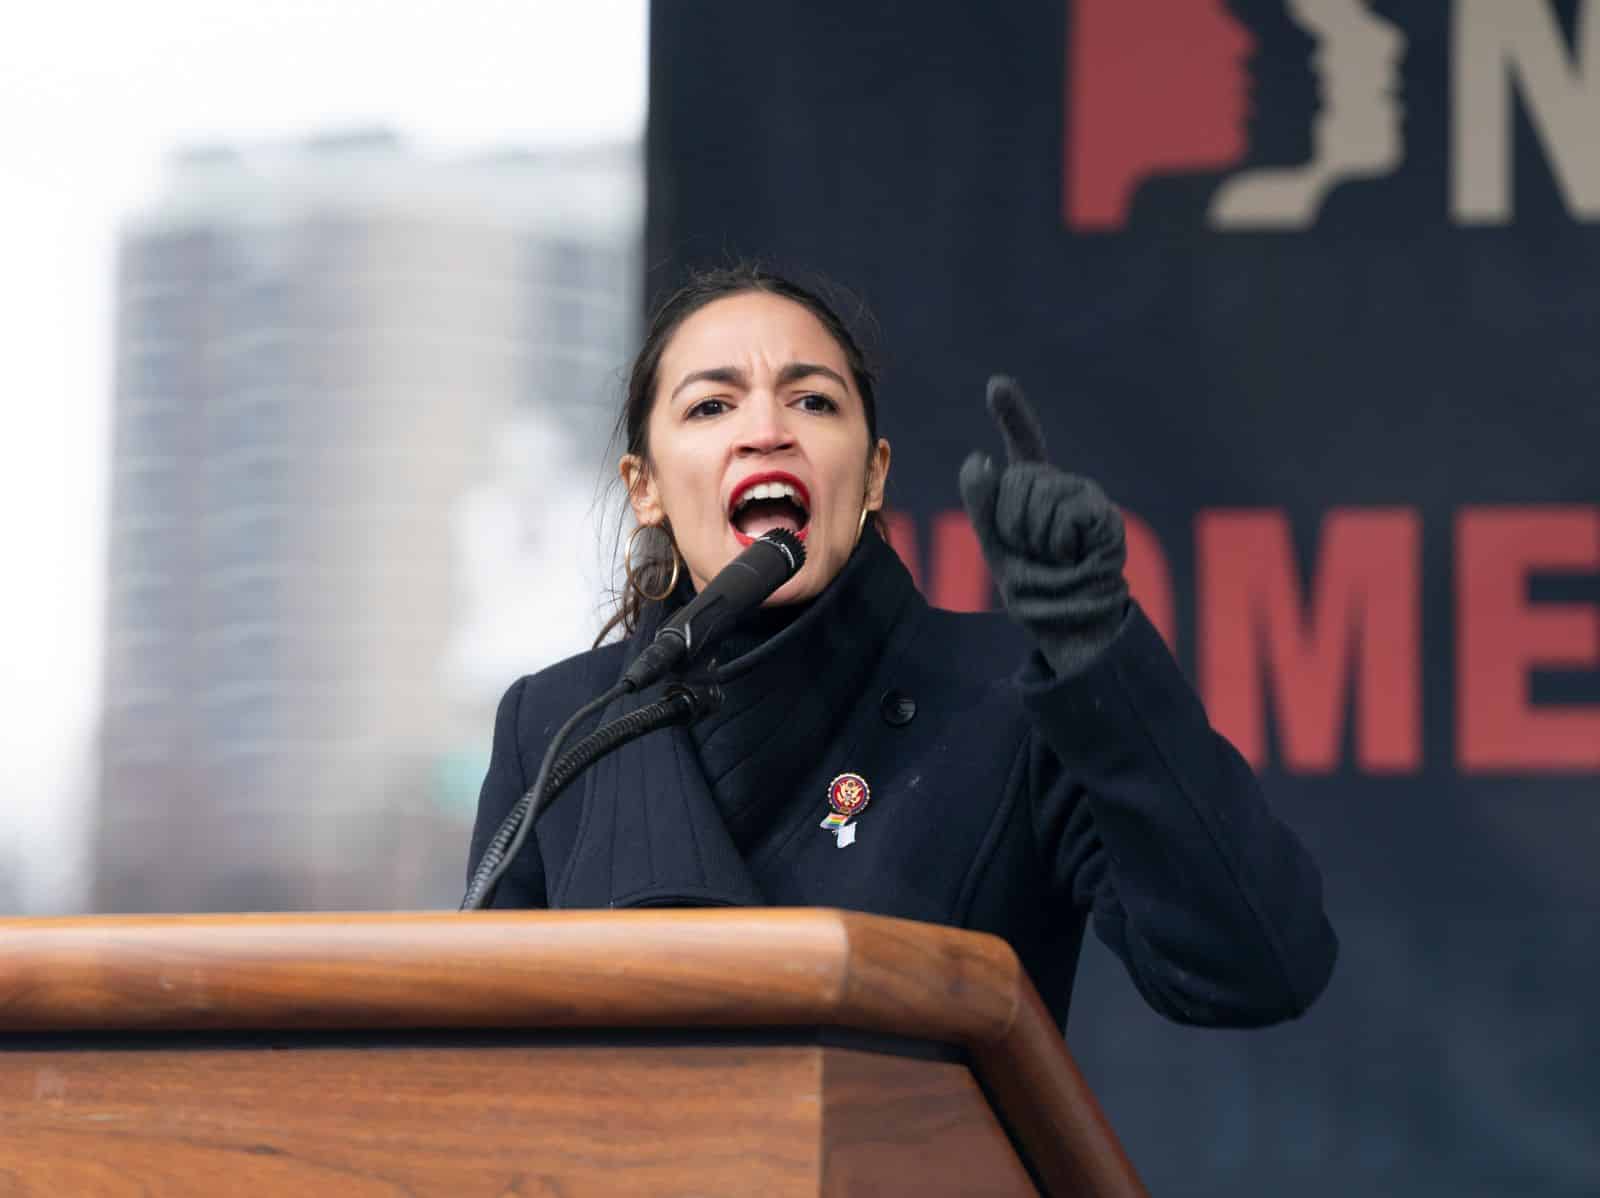 Image Credit: Shutterstock / lev radin <p><span>Despite efforts to silence her, AOC uses her platform to advocate for change, becoming a symbol of progressive politics and activism.</span></p>